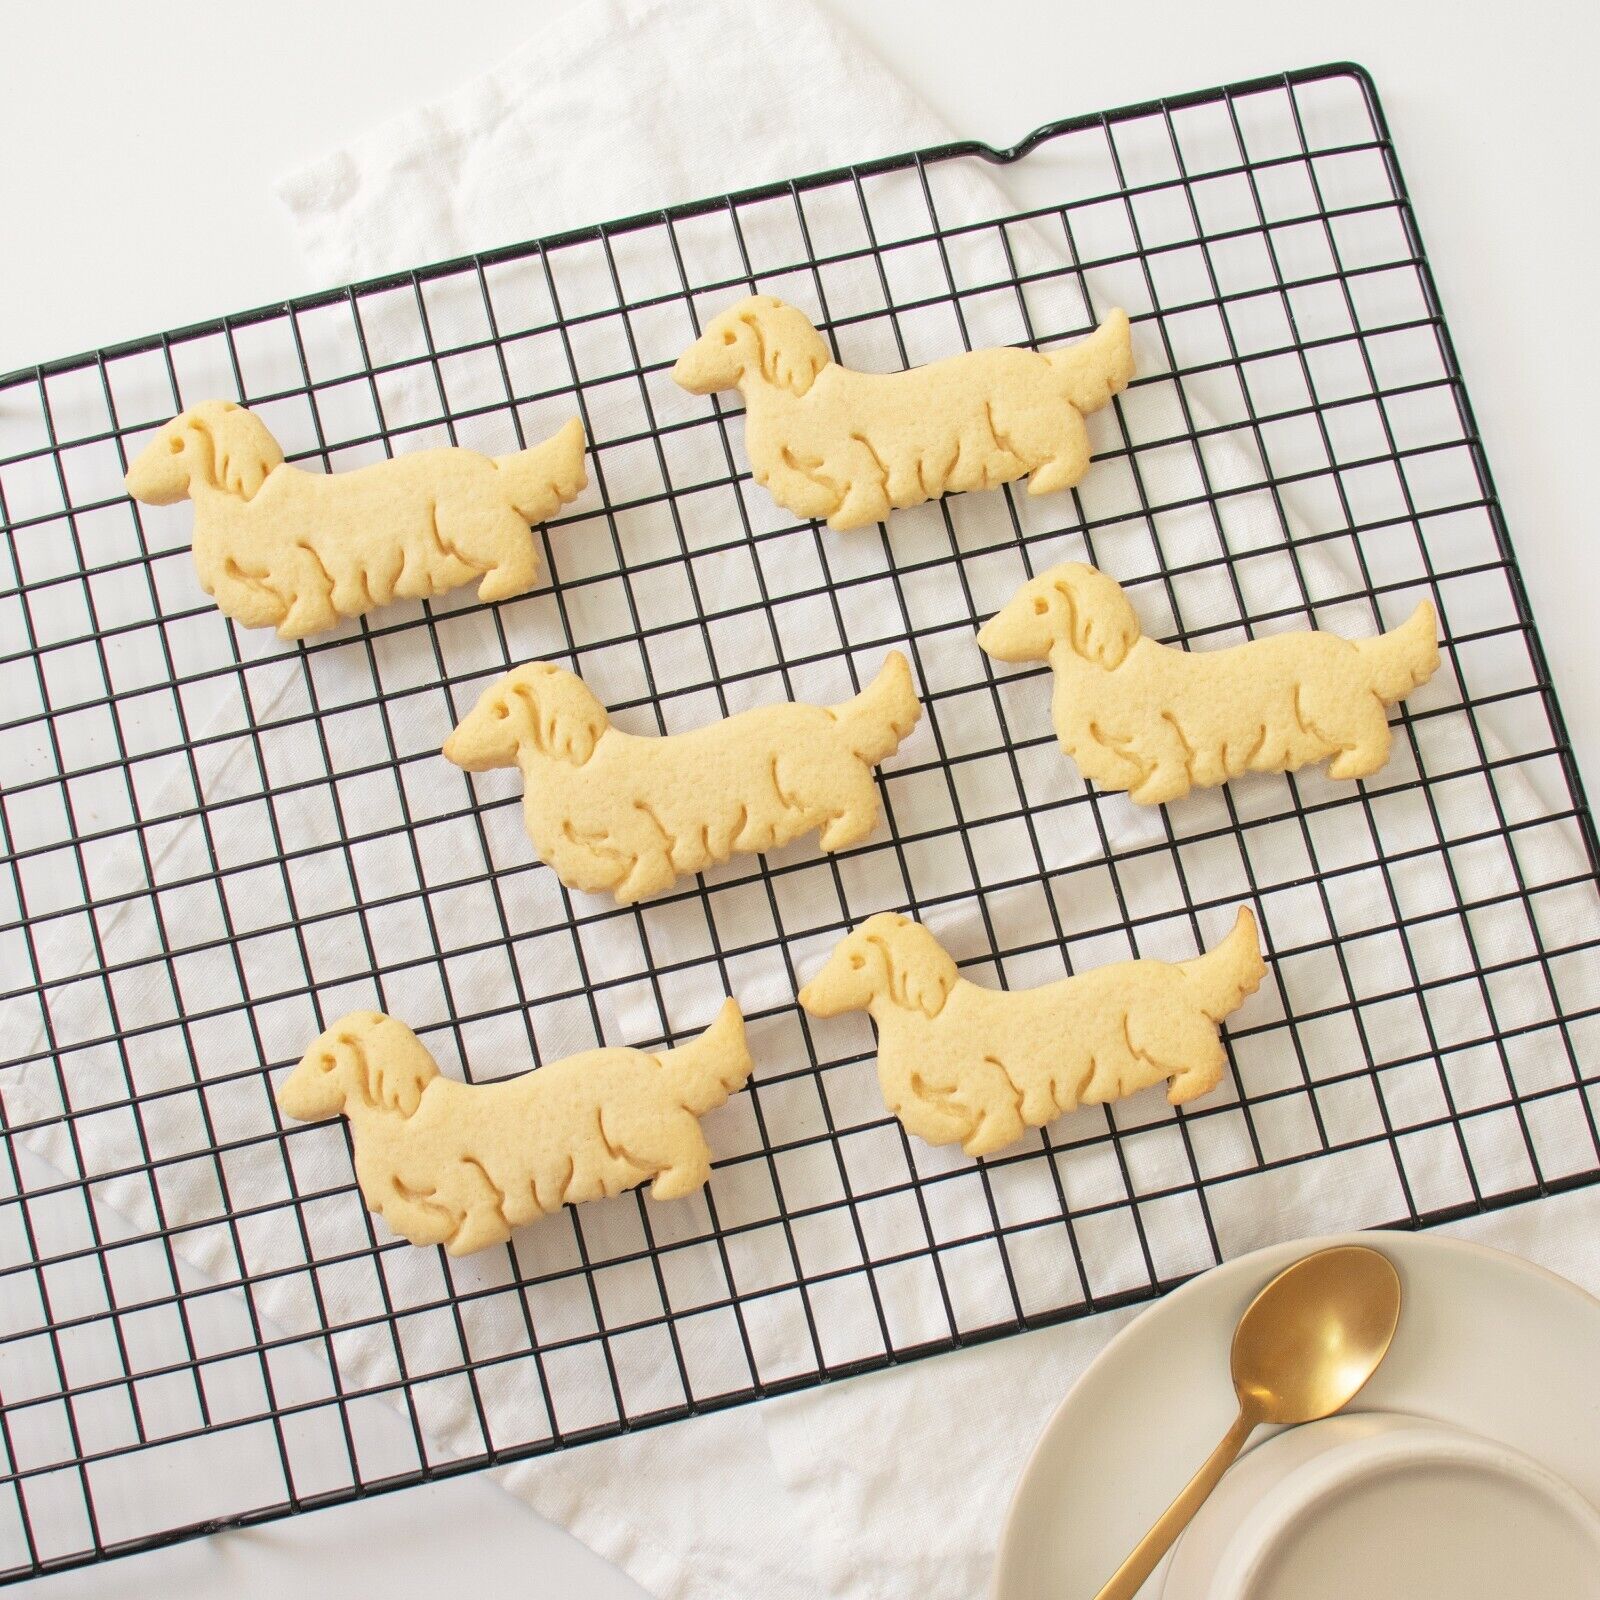 Long Haired Dachshund Cookie Cutters | The Best Dachshund Gifts